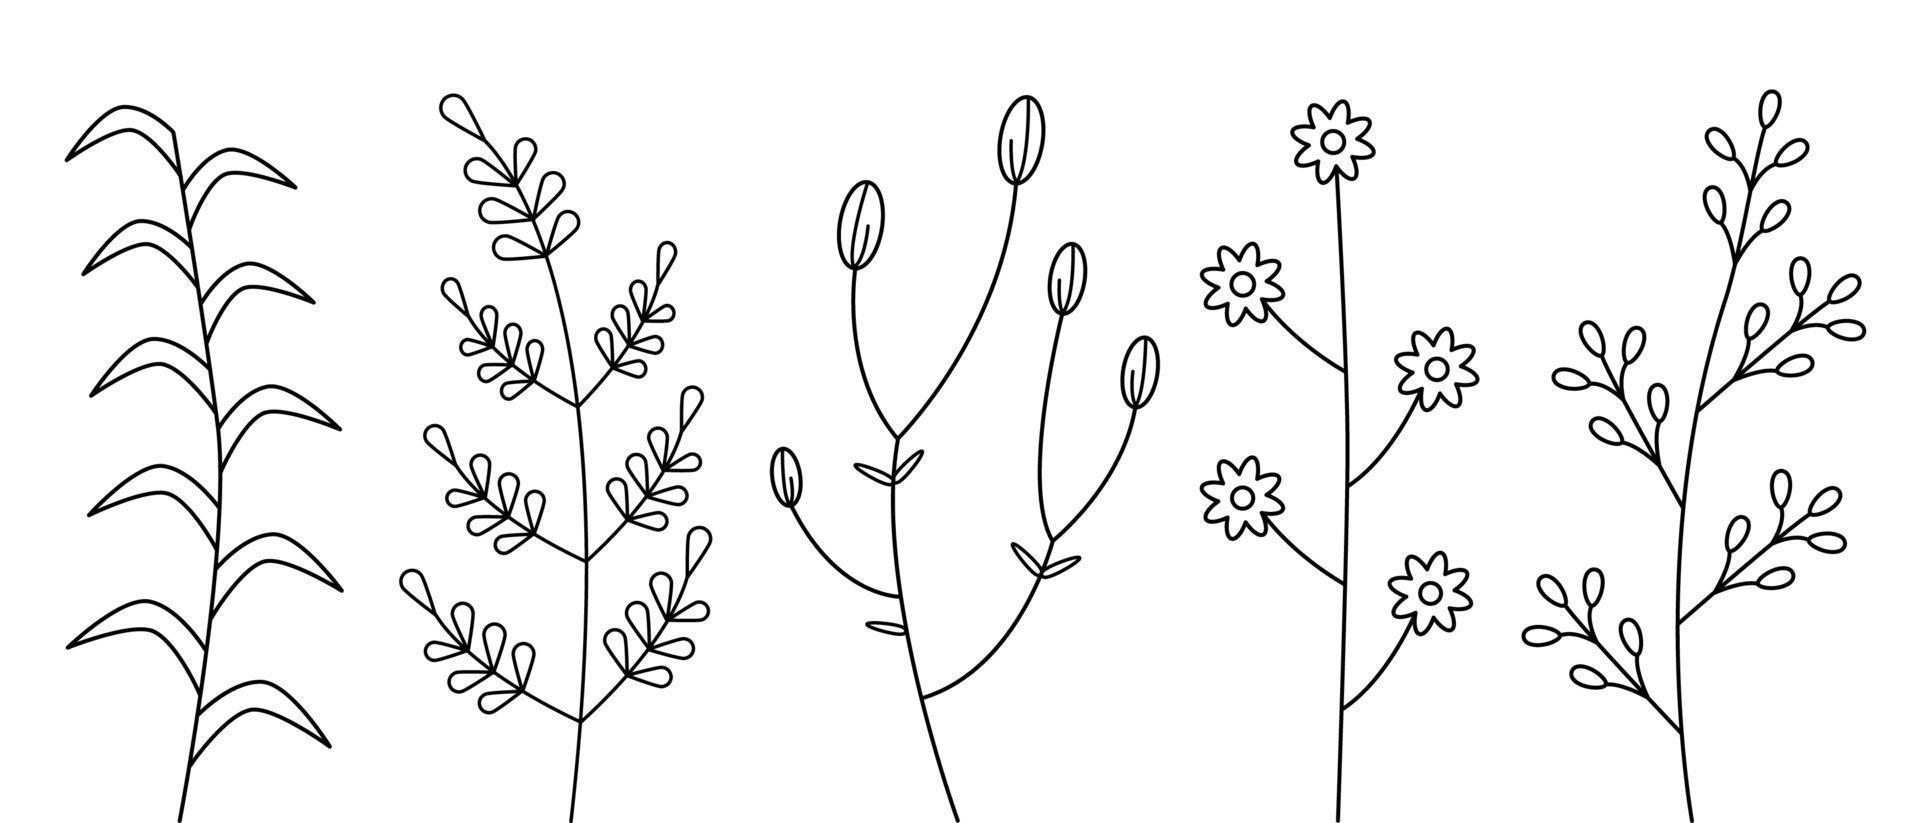 Hand drawn plant elements. Set of branches and twigs with leaves on white background. Vector illustration of floral doodles.